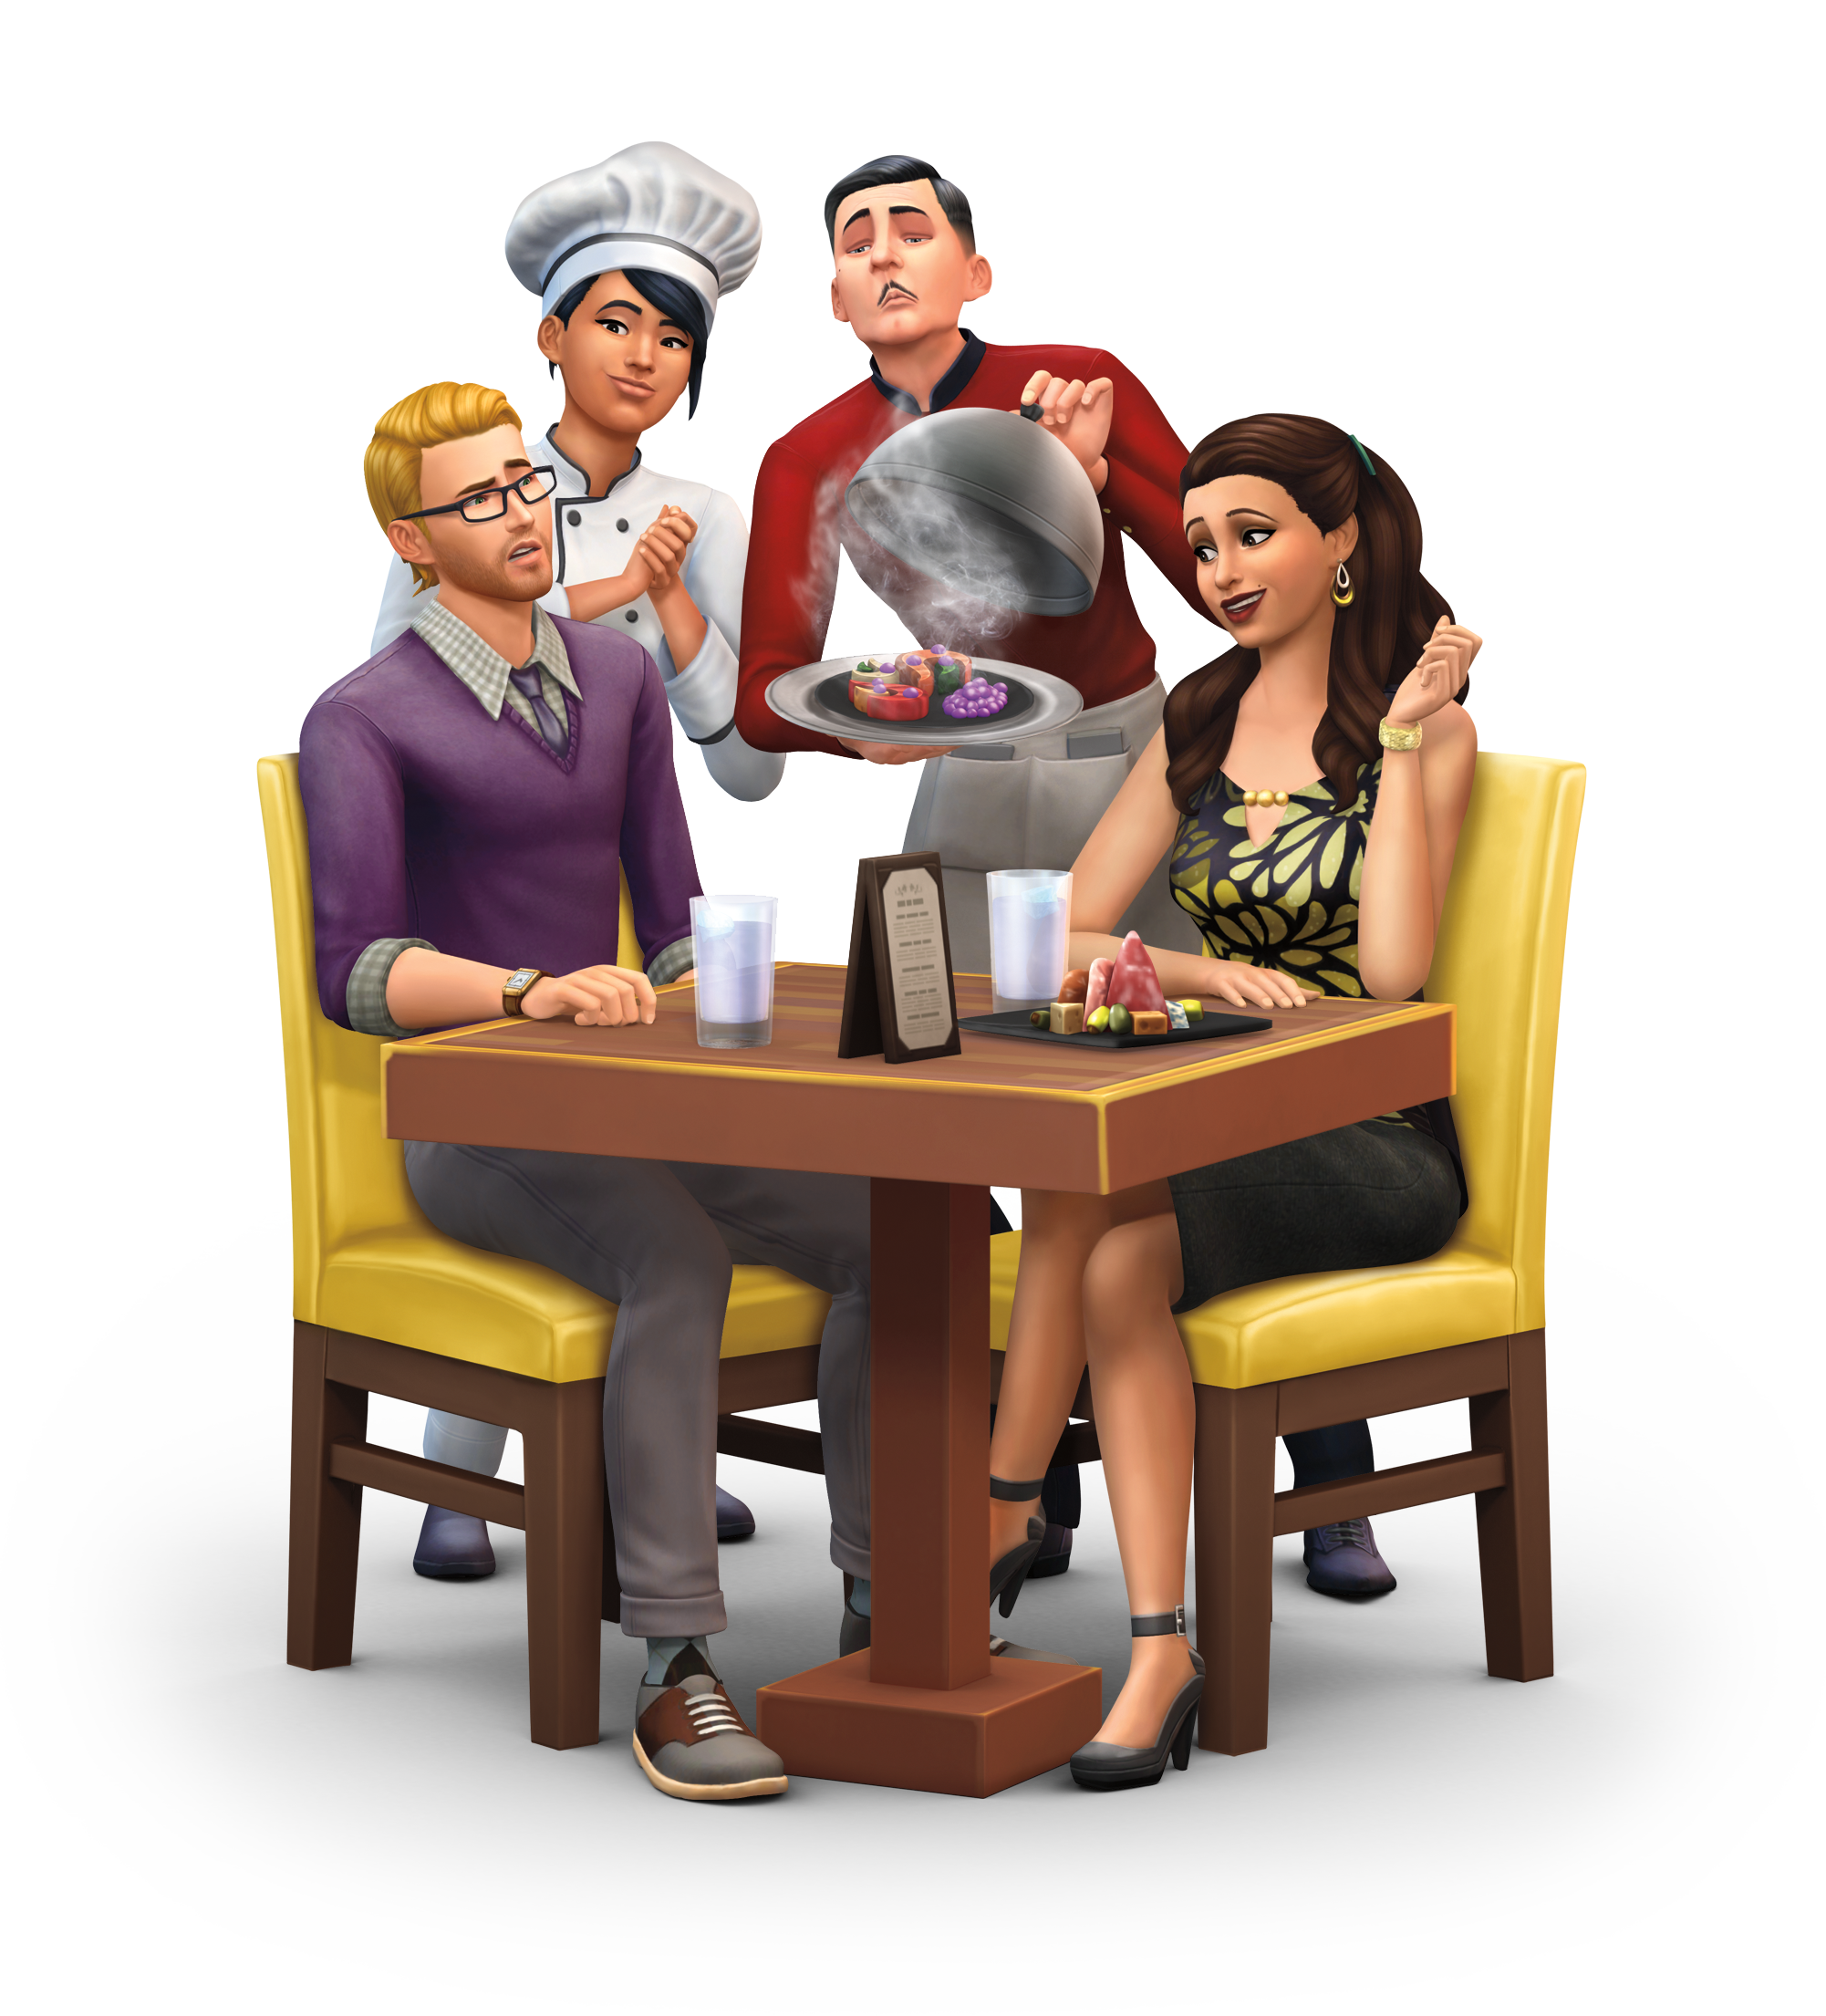 The Sims 4 Dine Out: HQ Box Art Render | SimsVIP